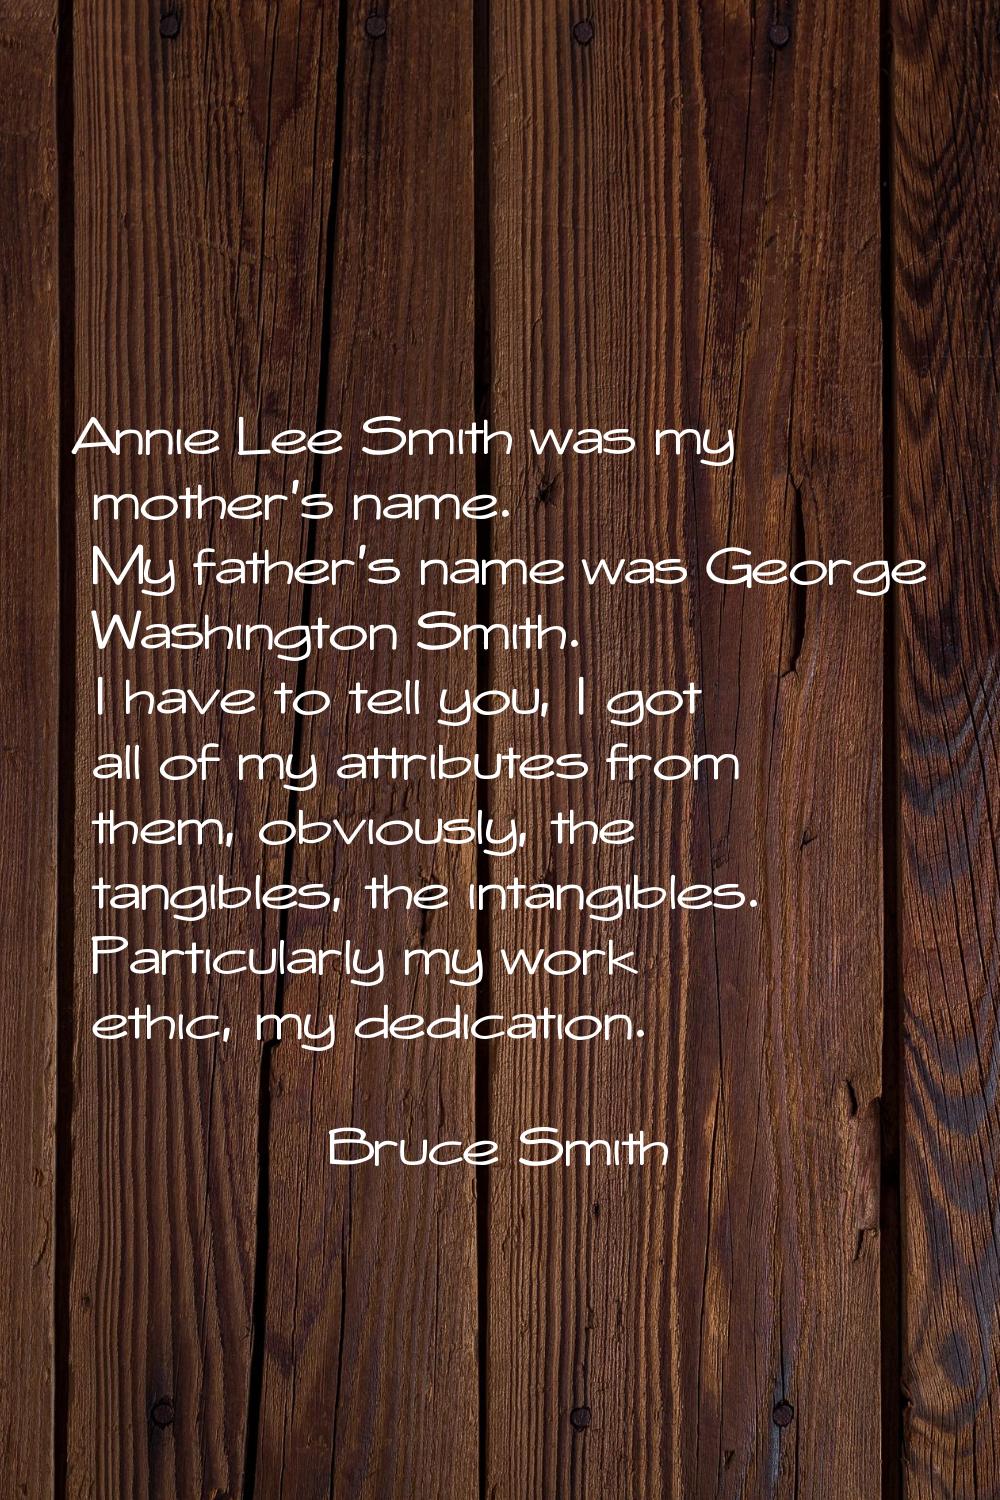 Annie Lee Smith was my mother's name. My father's name was George Washington Smith. I have to tell 